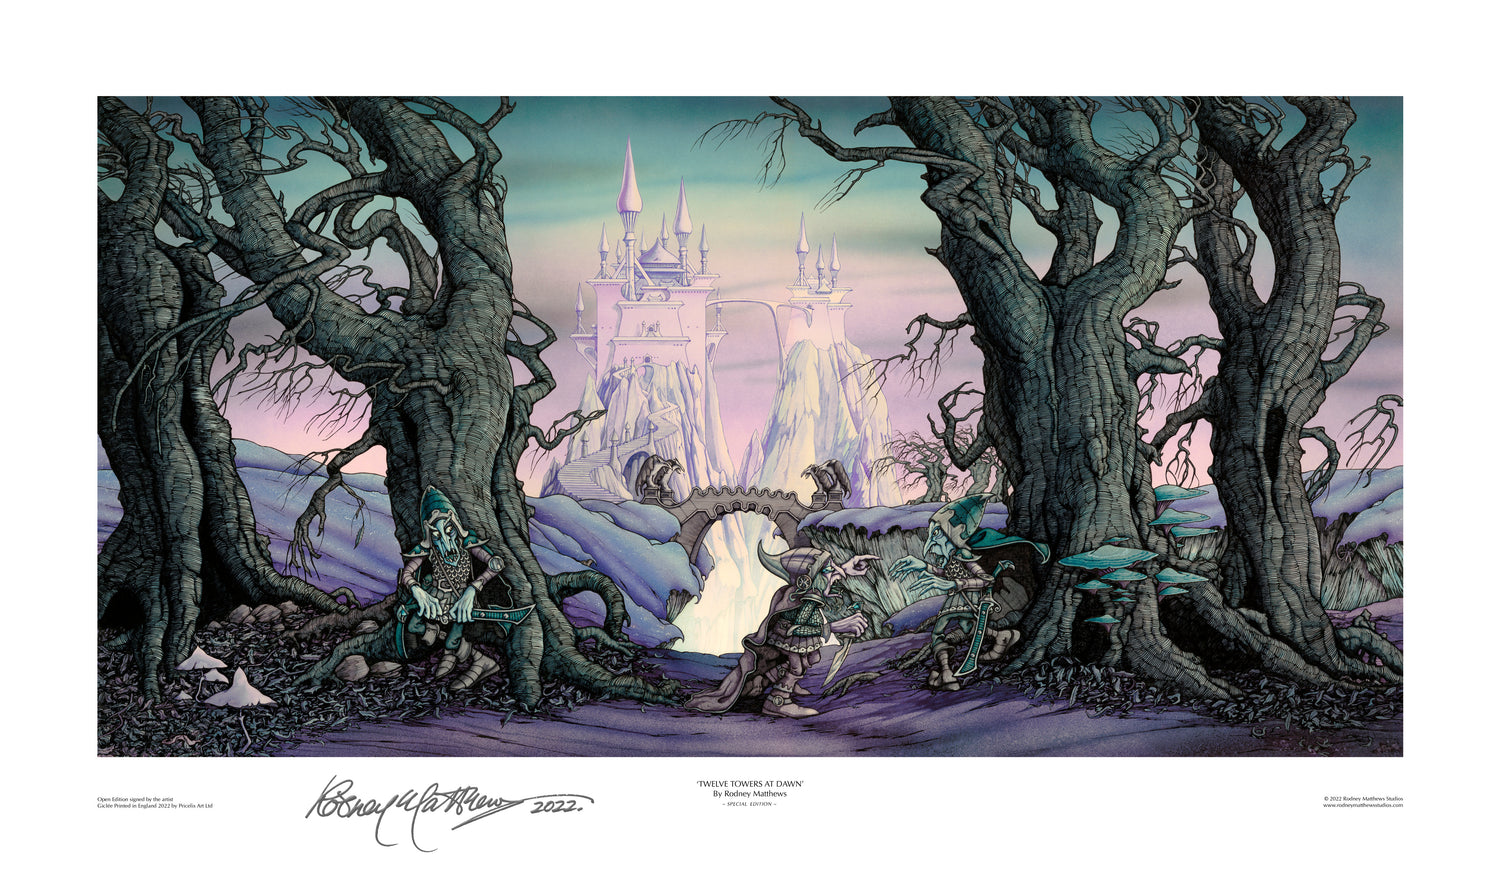 Twelve Towers at Dawn special open print by Rodney Matthews